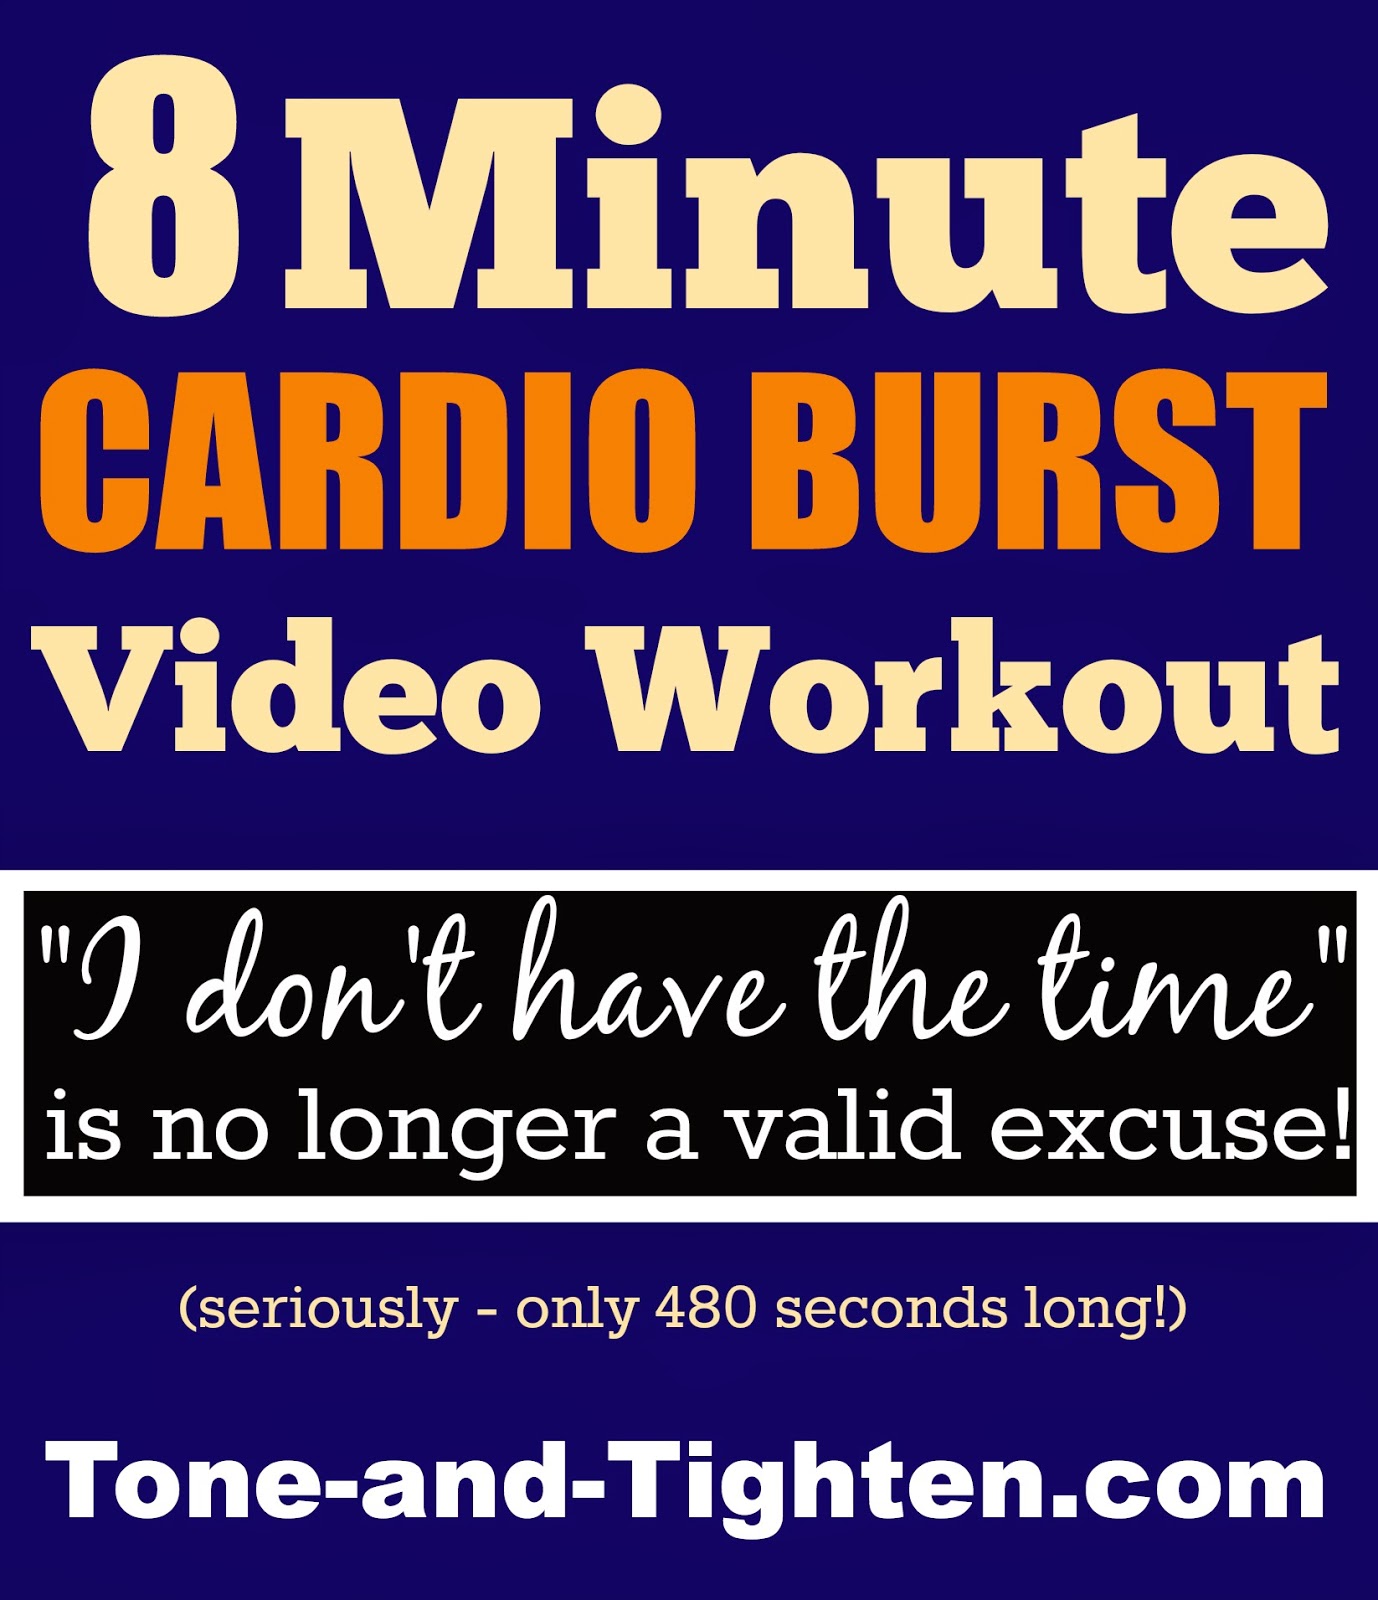 8-minute Quick Sweat Cardio Burst Video – Fast At-Home Cardio Workout – No Equipment Required!